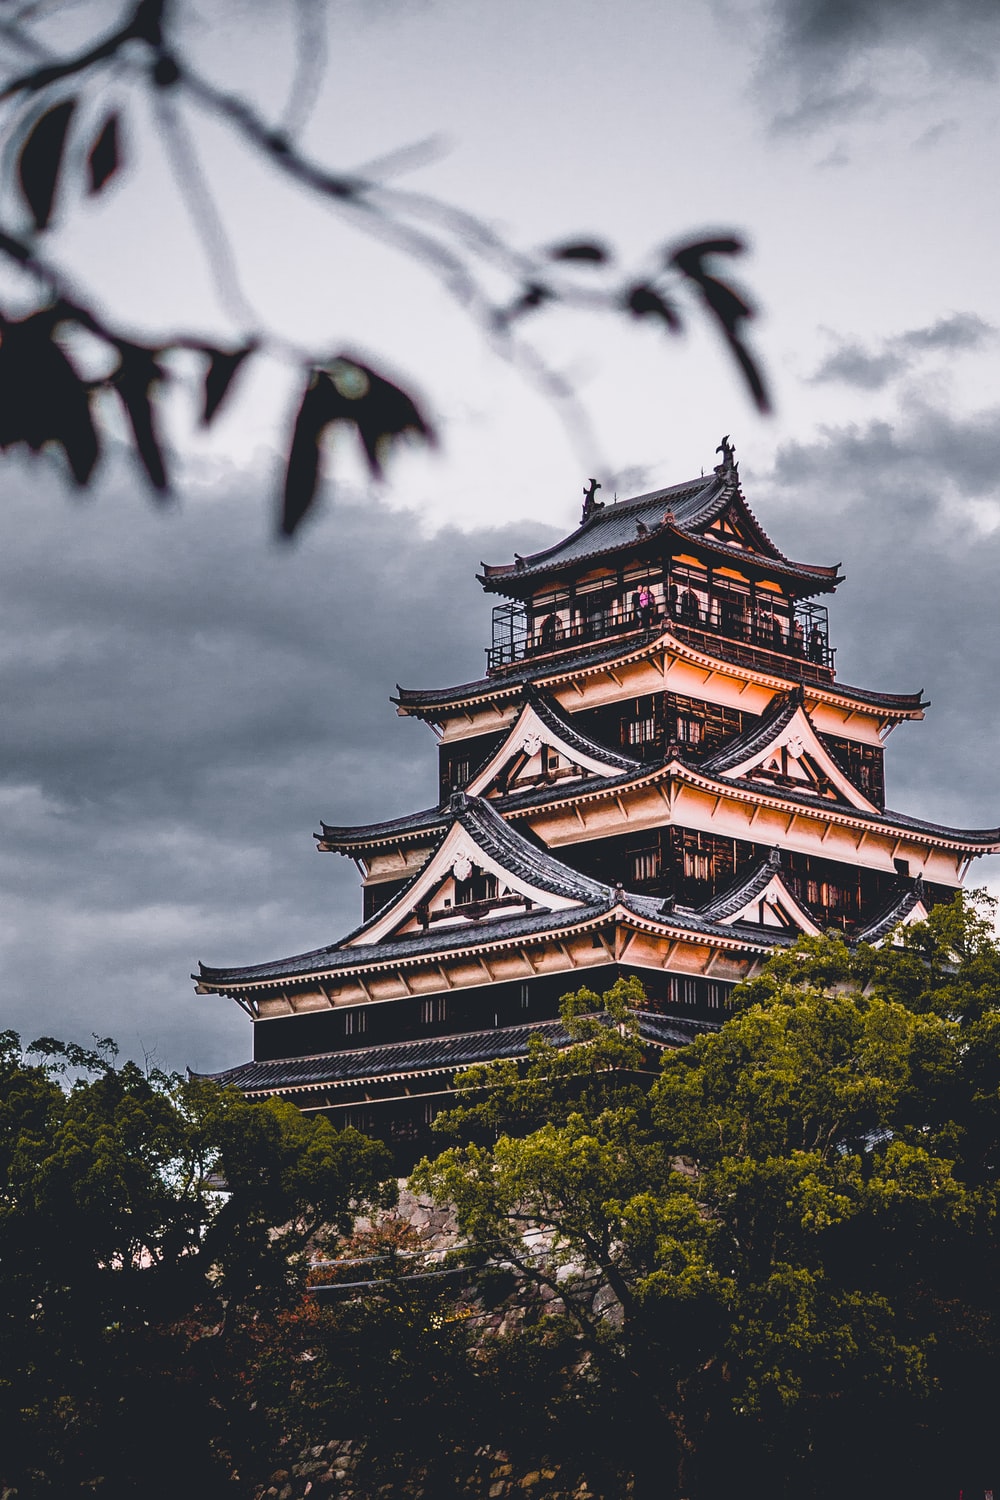 Japanese Architecture Picture. Download Free Image